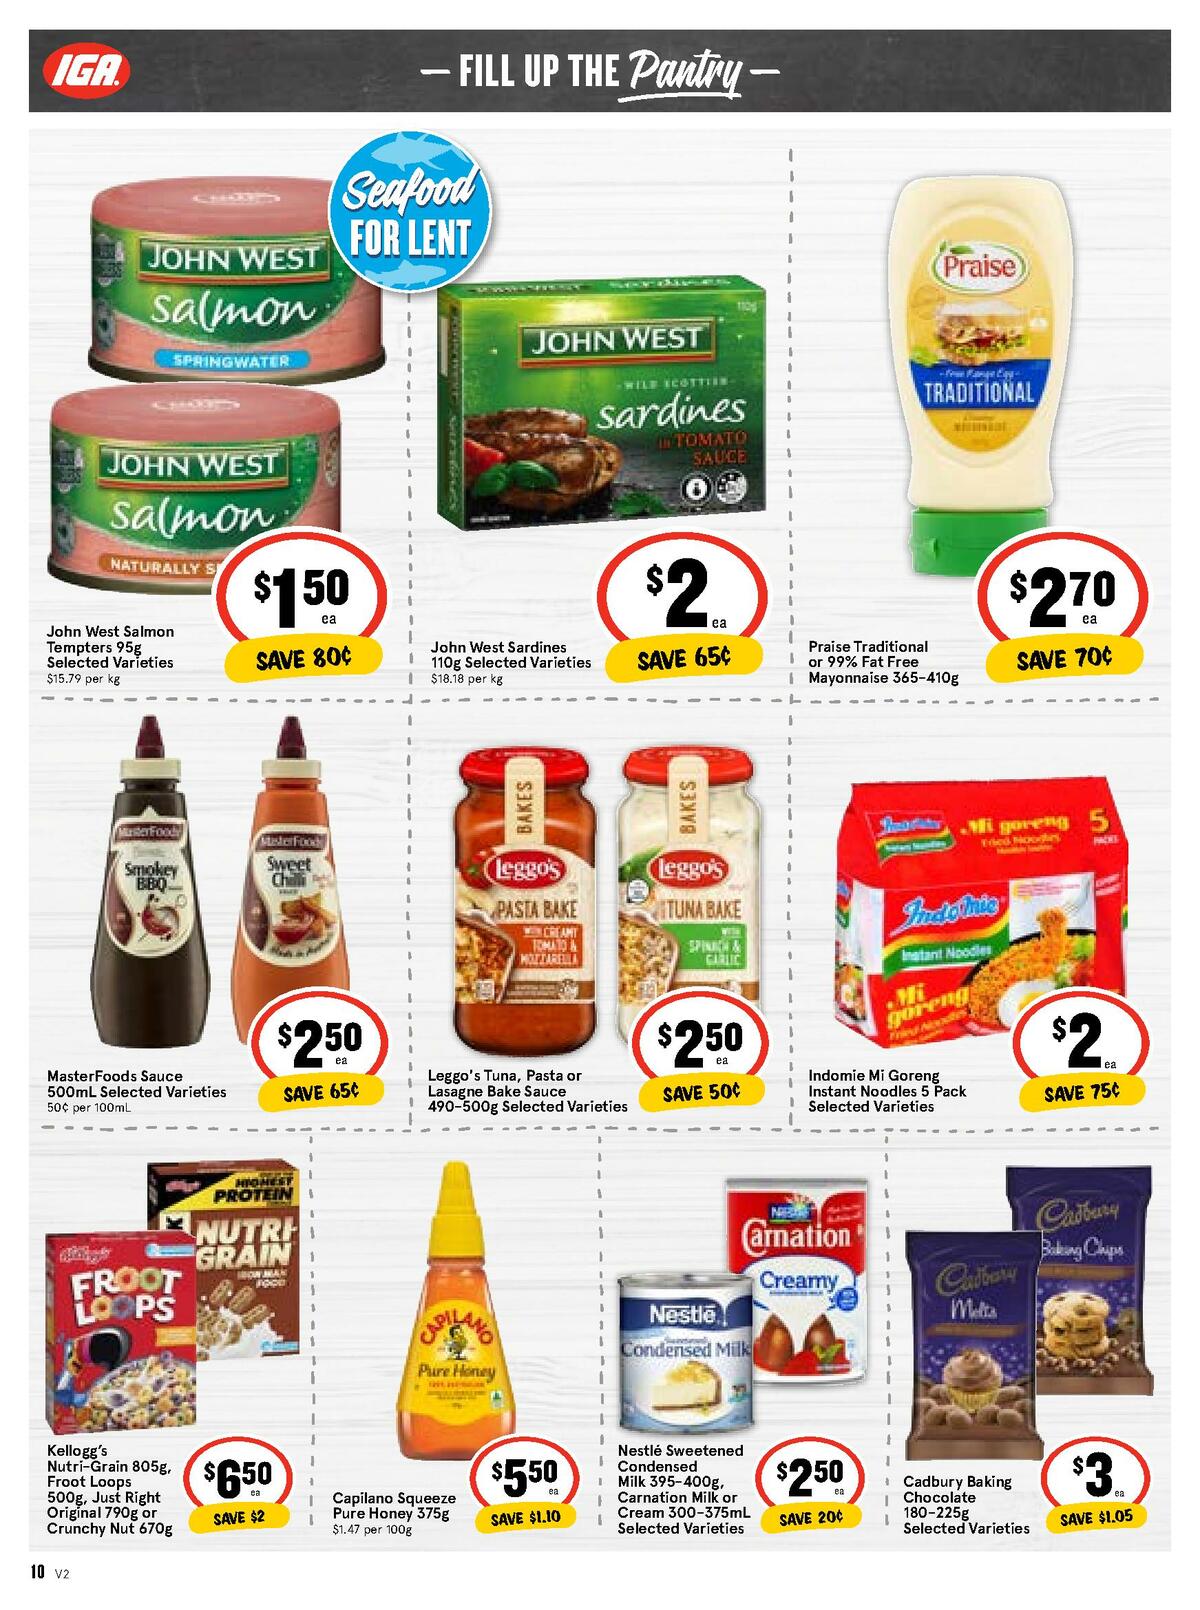 IGA Catalogues from 4 March